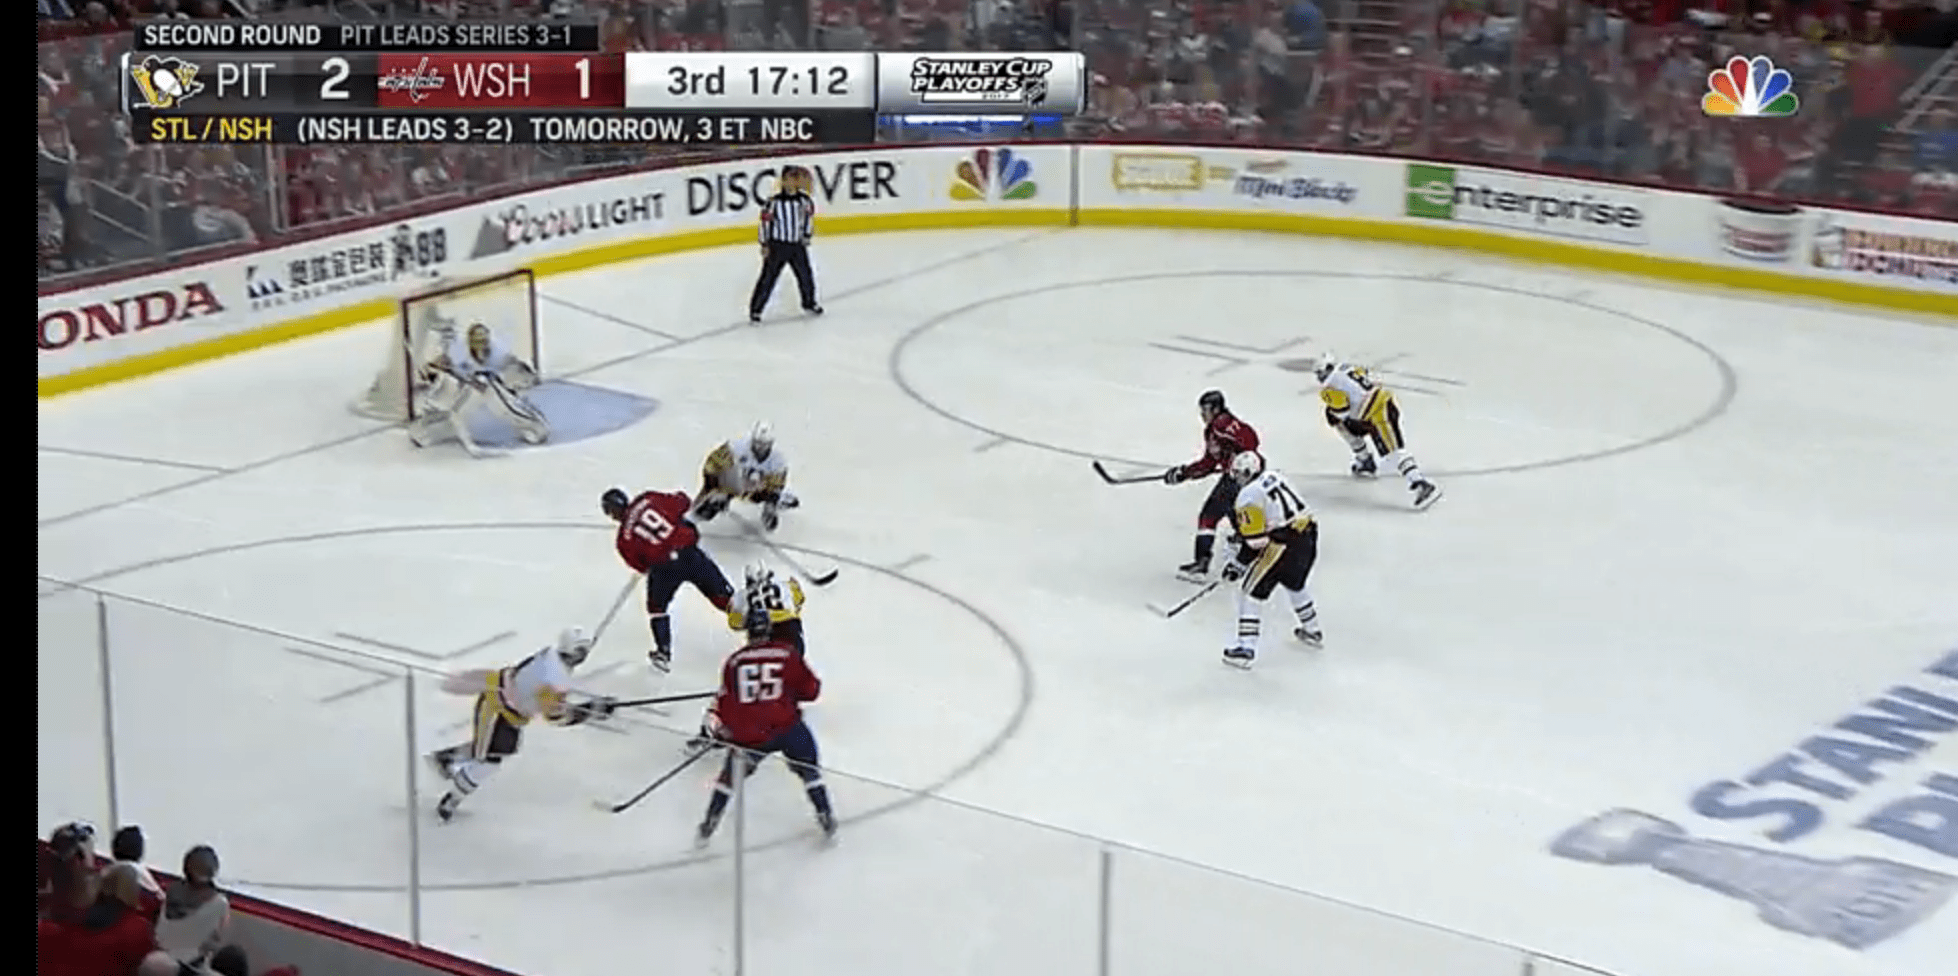 Andre Burakovsky Scores First NHL Goal in First NHL Game, Jumps Into Boards  Like Ovechkin to Celebrate (GIFs)